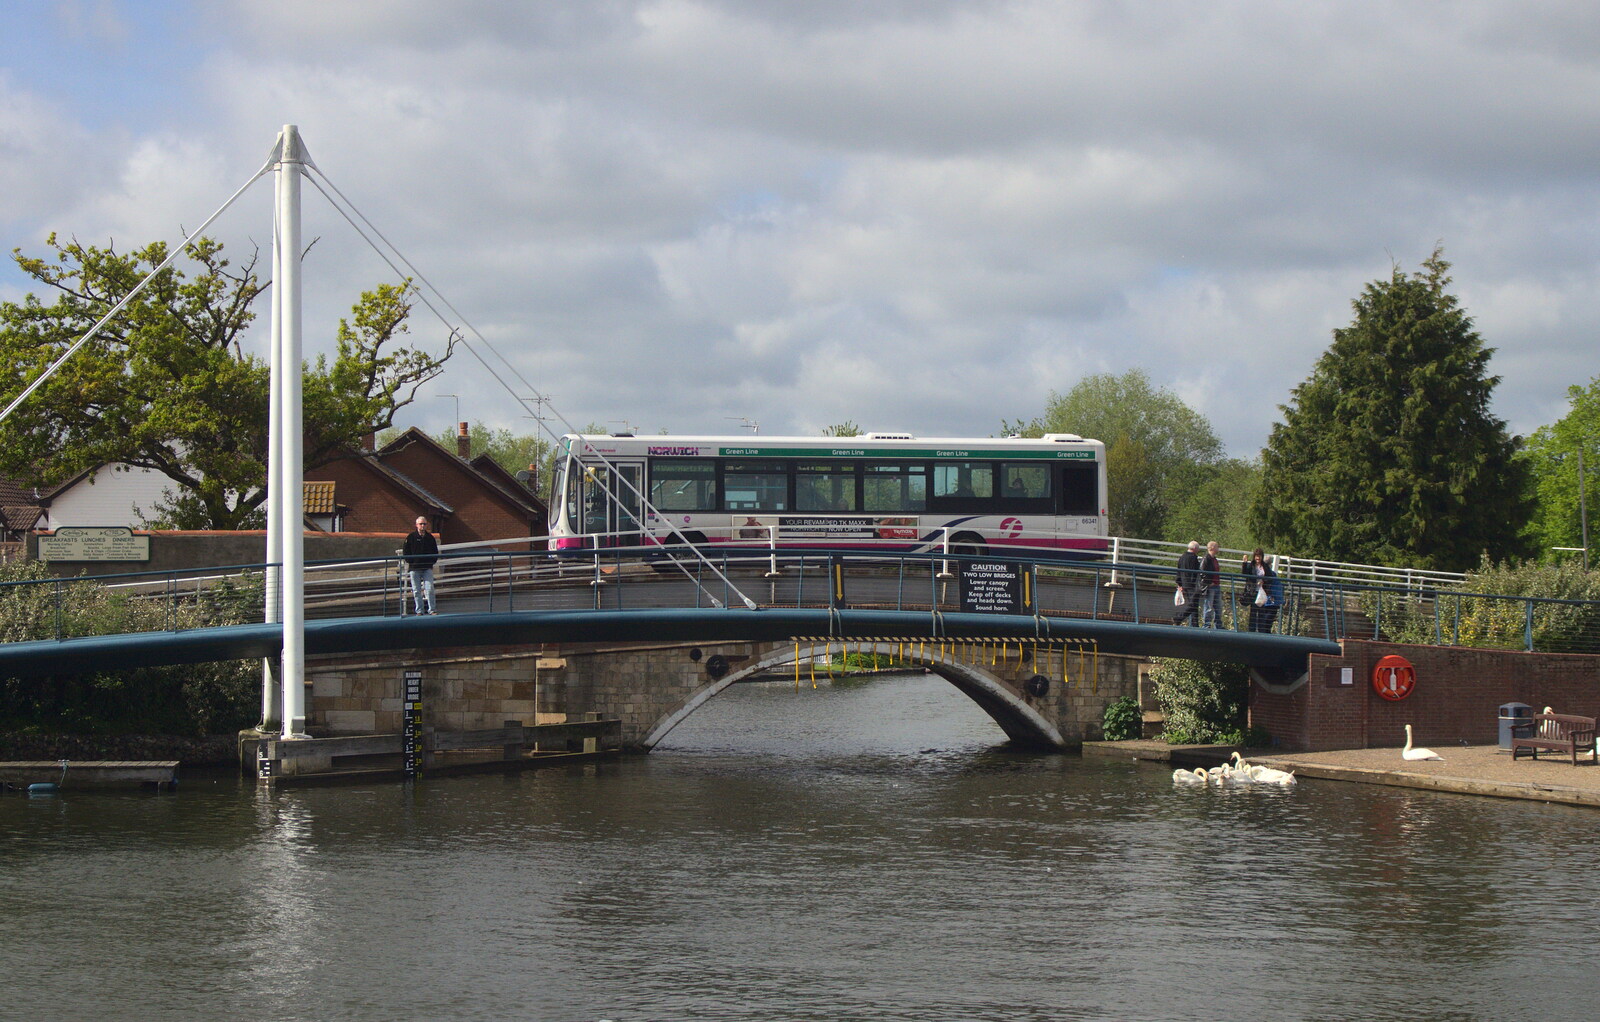 A coach crosses the bridge from A Trip on the Norfolk Broads, Wroxham, Norfolk - 25th May 2013